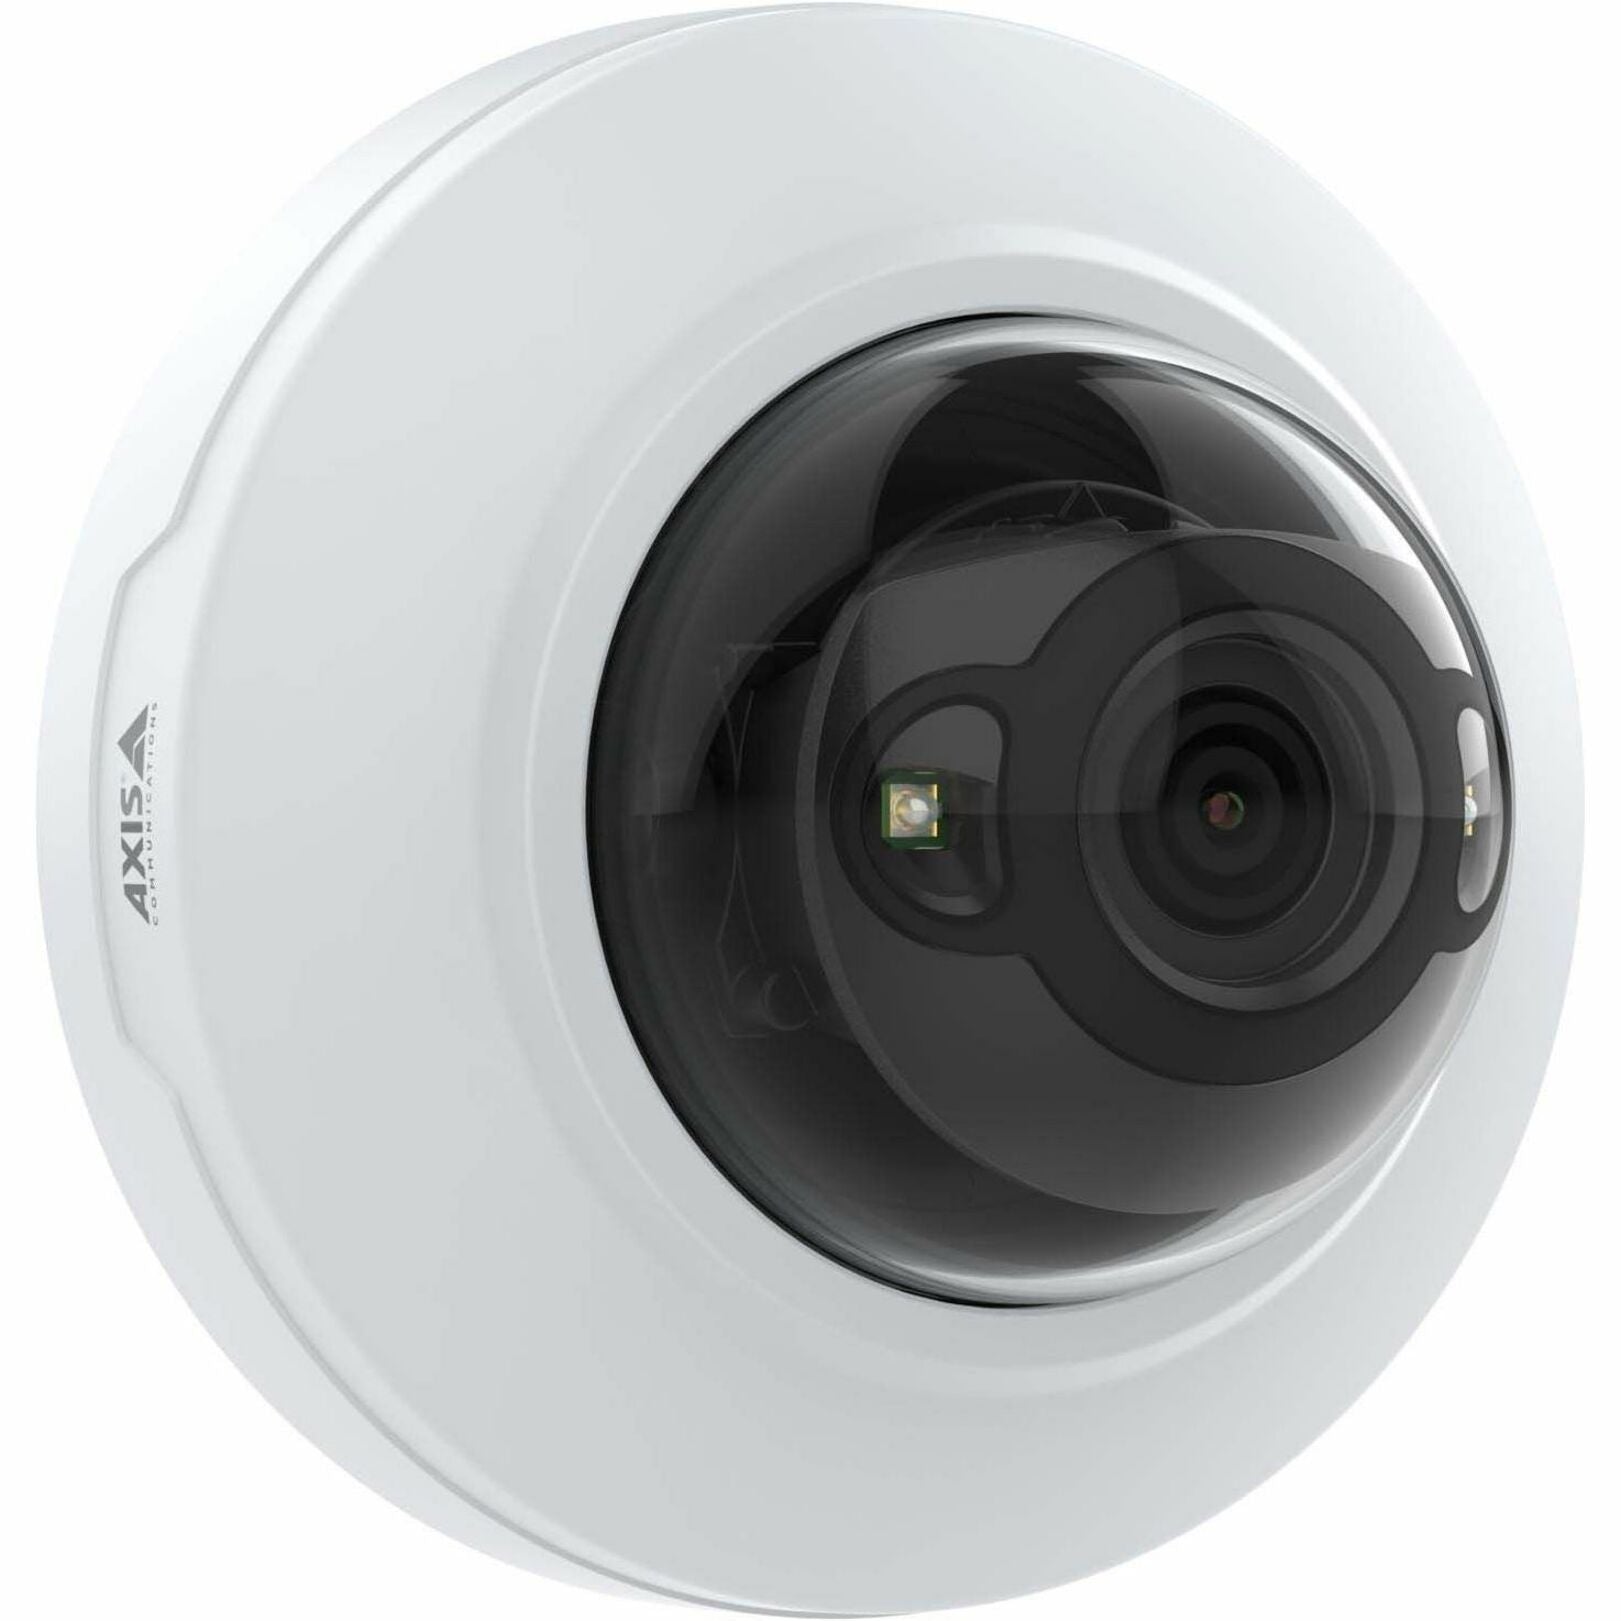 AXIS 02677-001 M4215-LV Dome Camera Varifocal 2 MP dome with IR and deep learning, Full HD, Color, 1 Pack, White